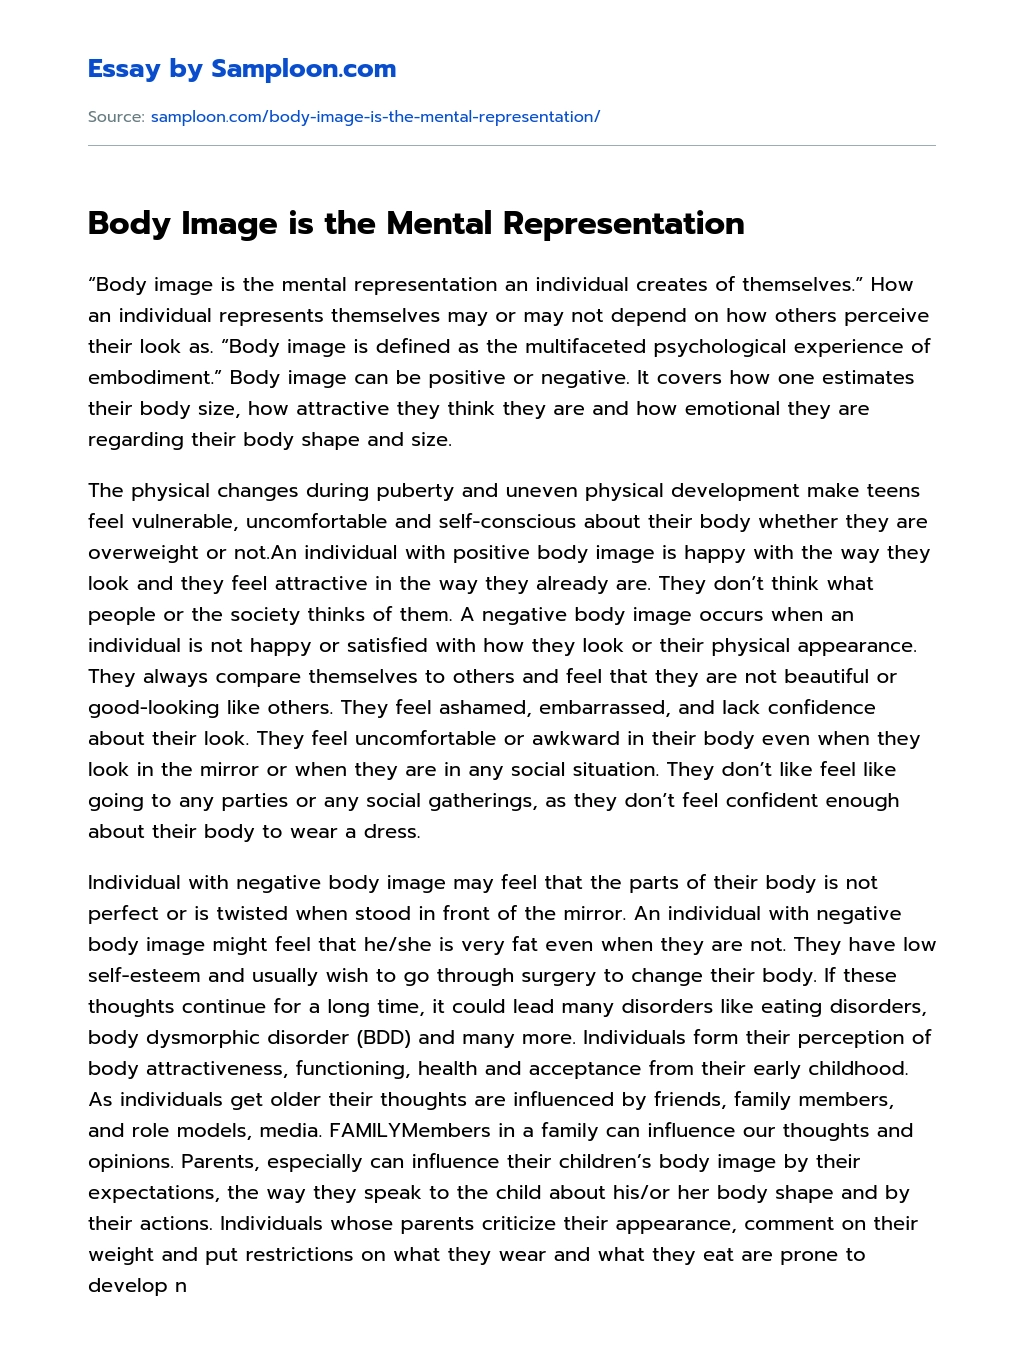 Body Image is the Mental Representation essay